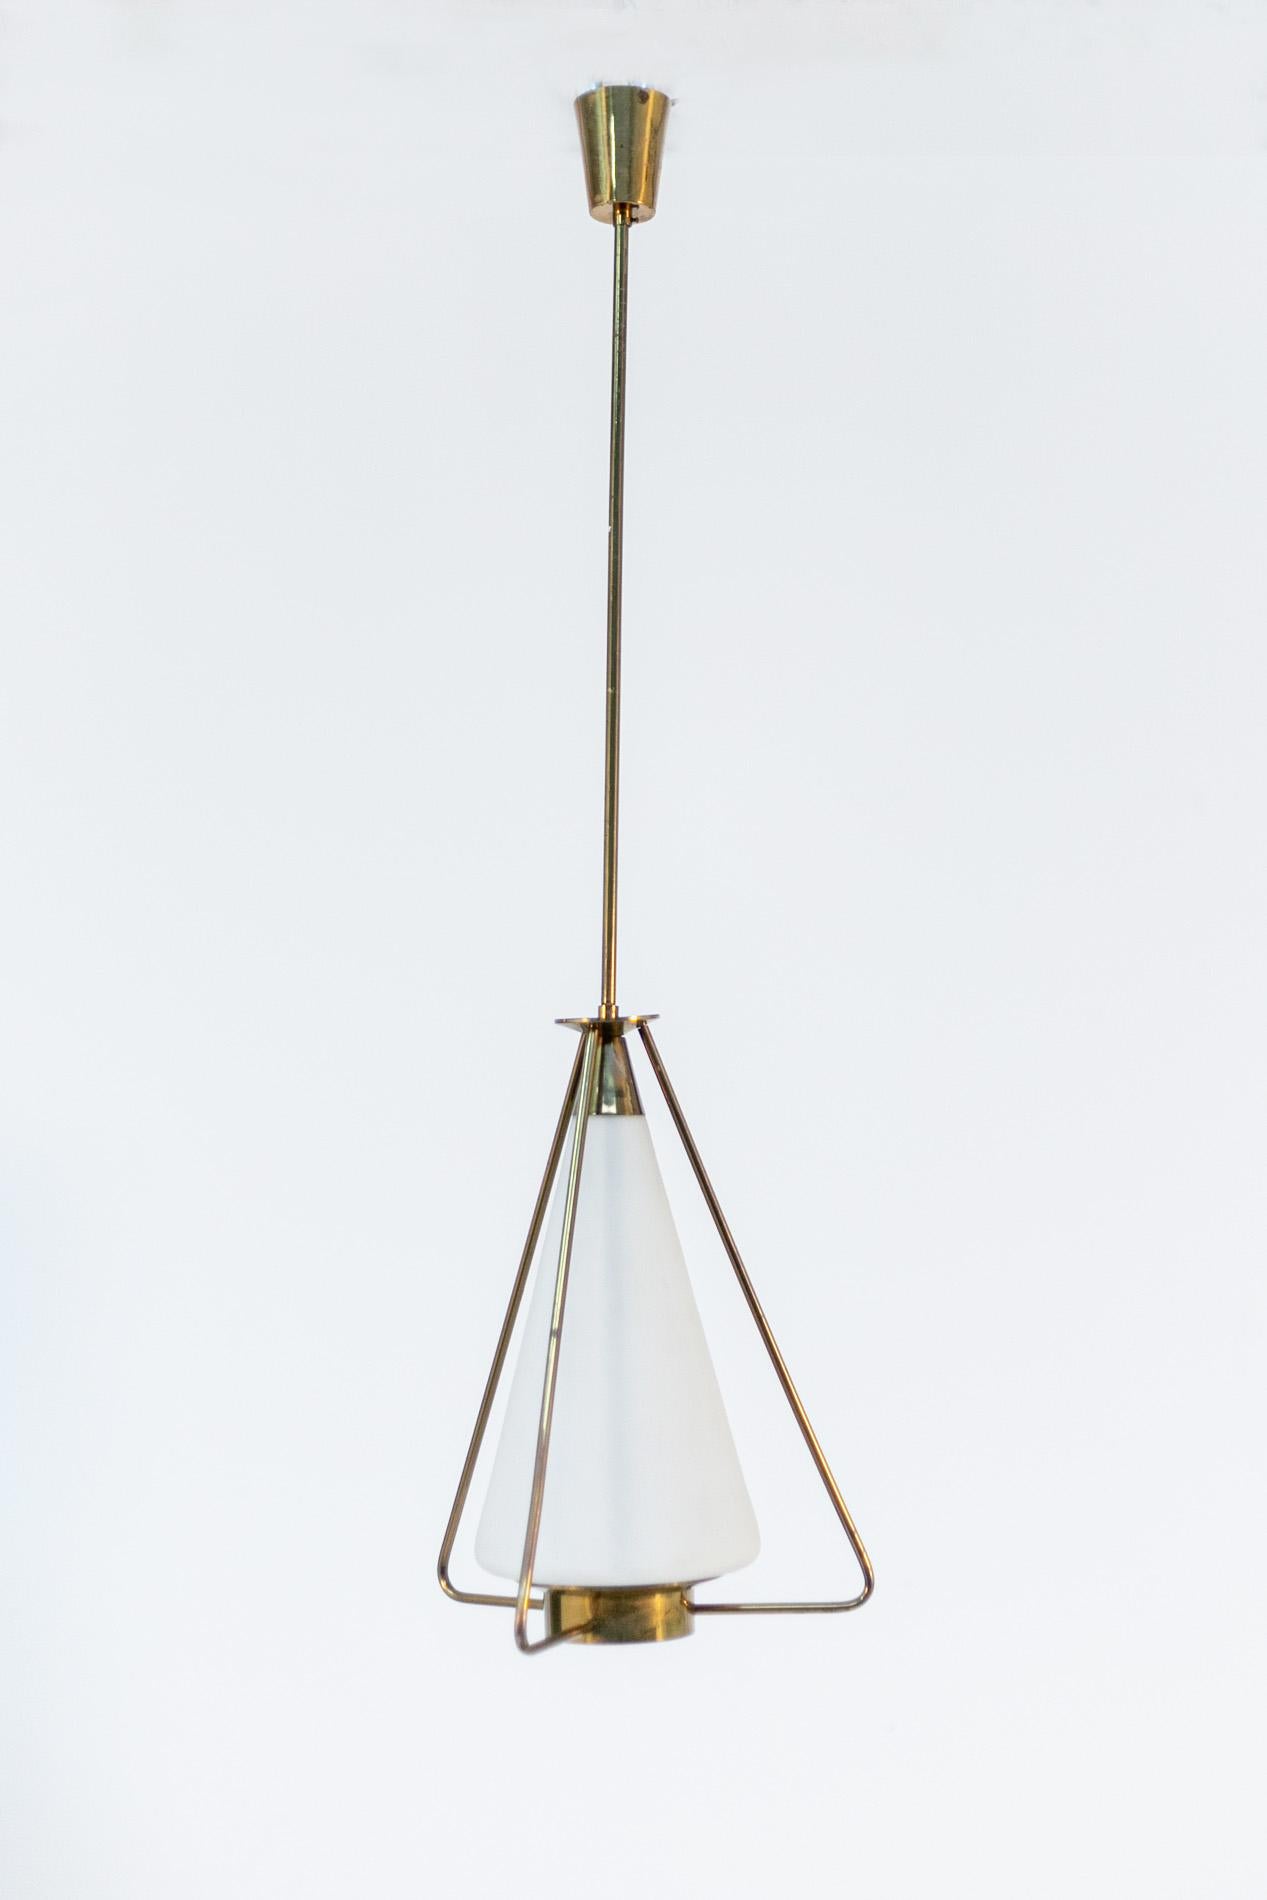 Elegant Italian pendant of 1950s stilnovo manufacture. The pendant is made with a brass frame. Radiating from the main stem at the bottom are three brass tubes that serve as both ornamentation and support. The light holder is made of opal glass with